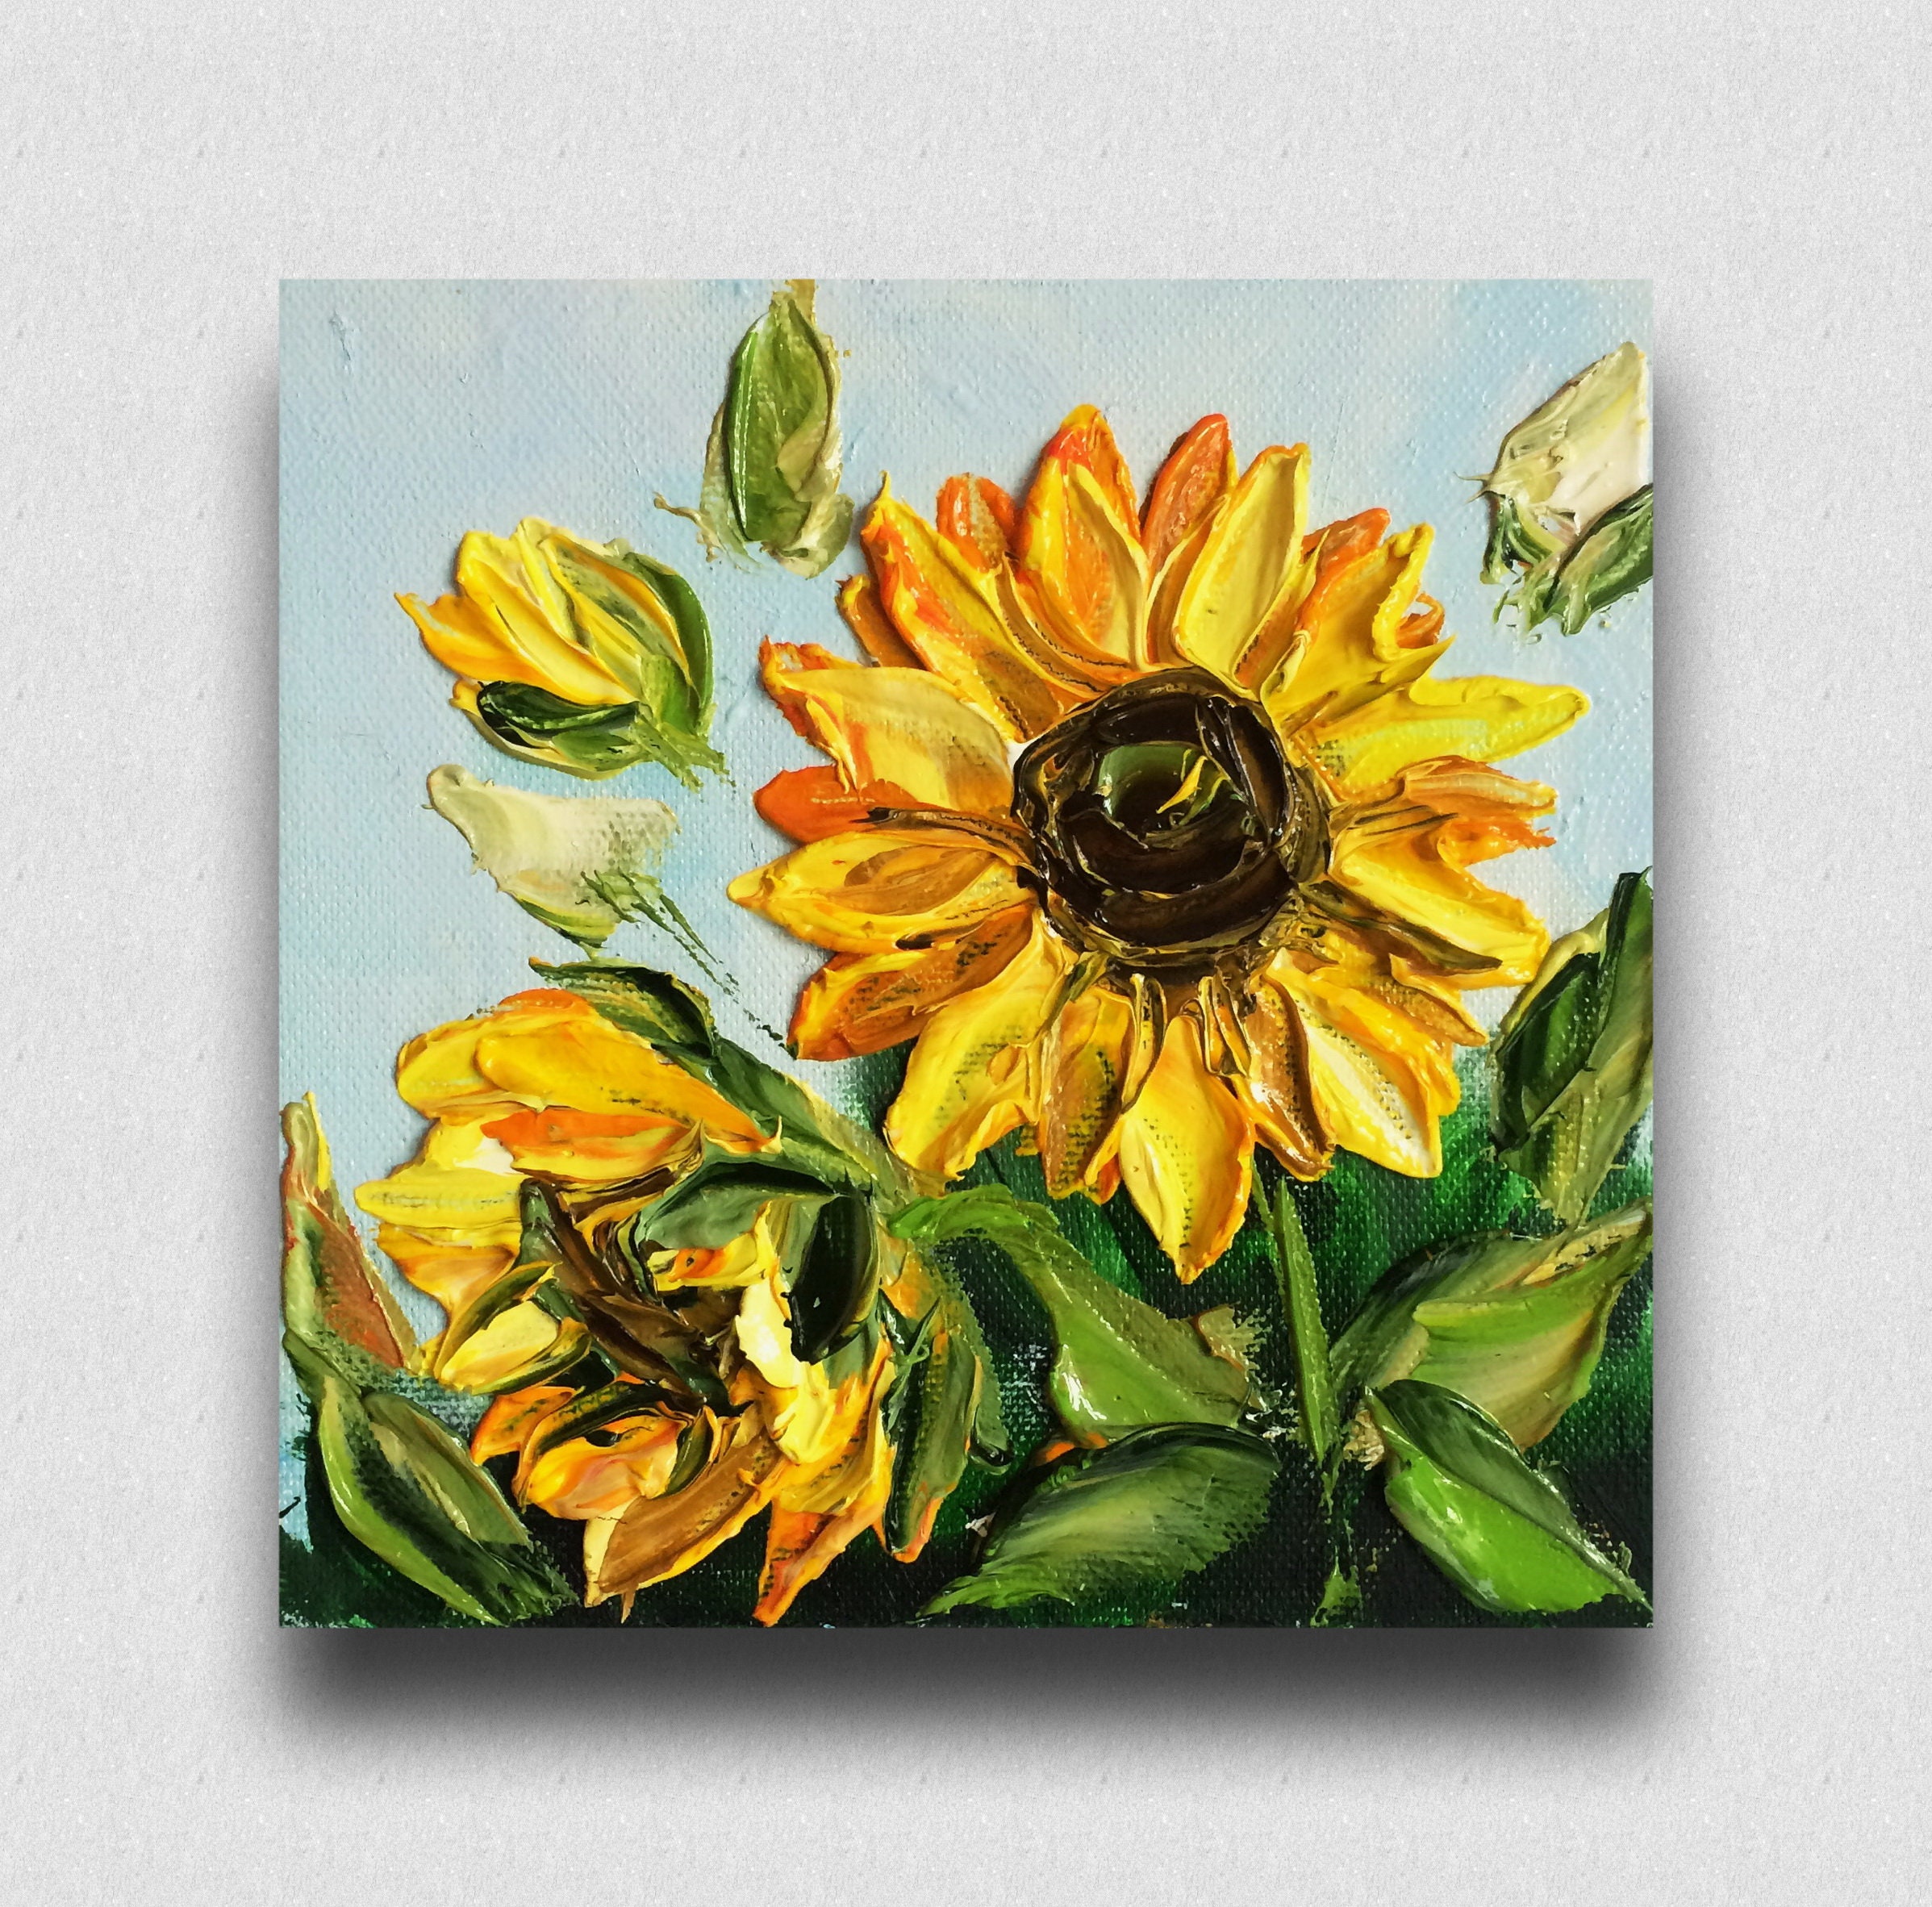 Painting of Etsy Flower Online Little an Miniature With Miniature. Easel. India Floral Canvas. - Painting Art. Sunflower Sunflower Yellow in a Wall Buy on Present.